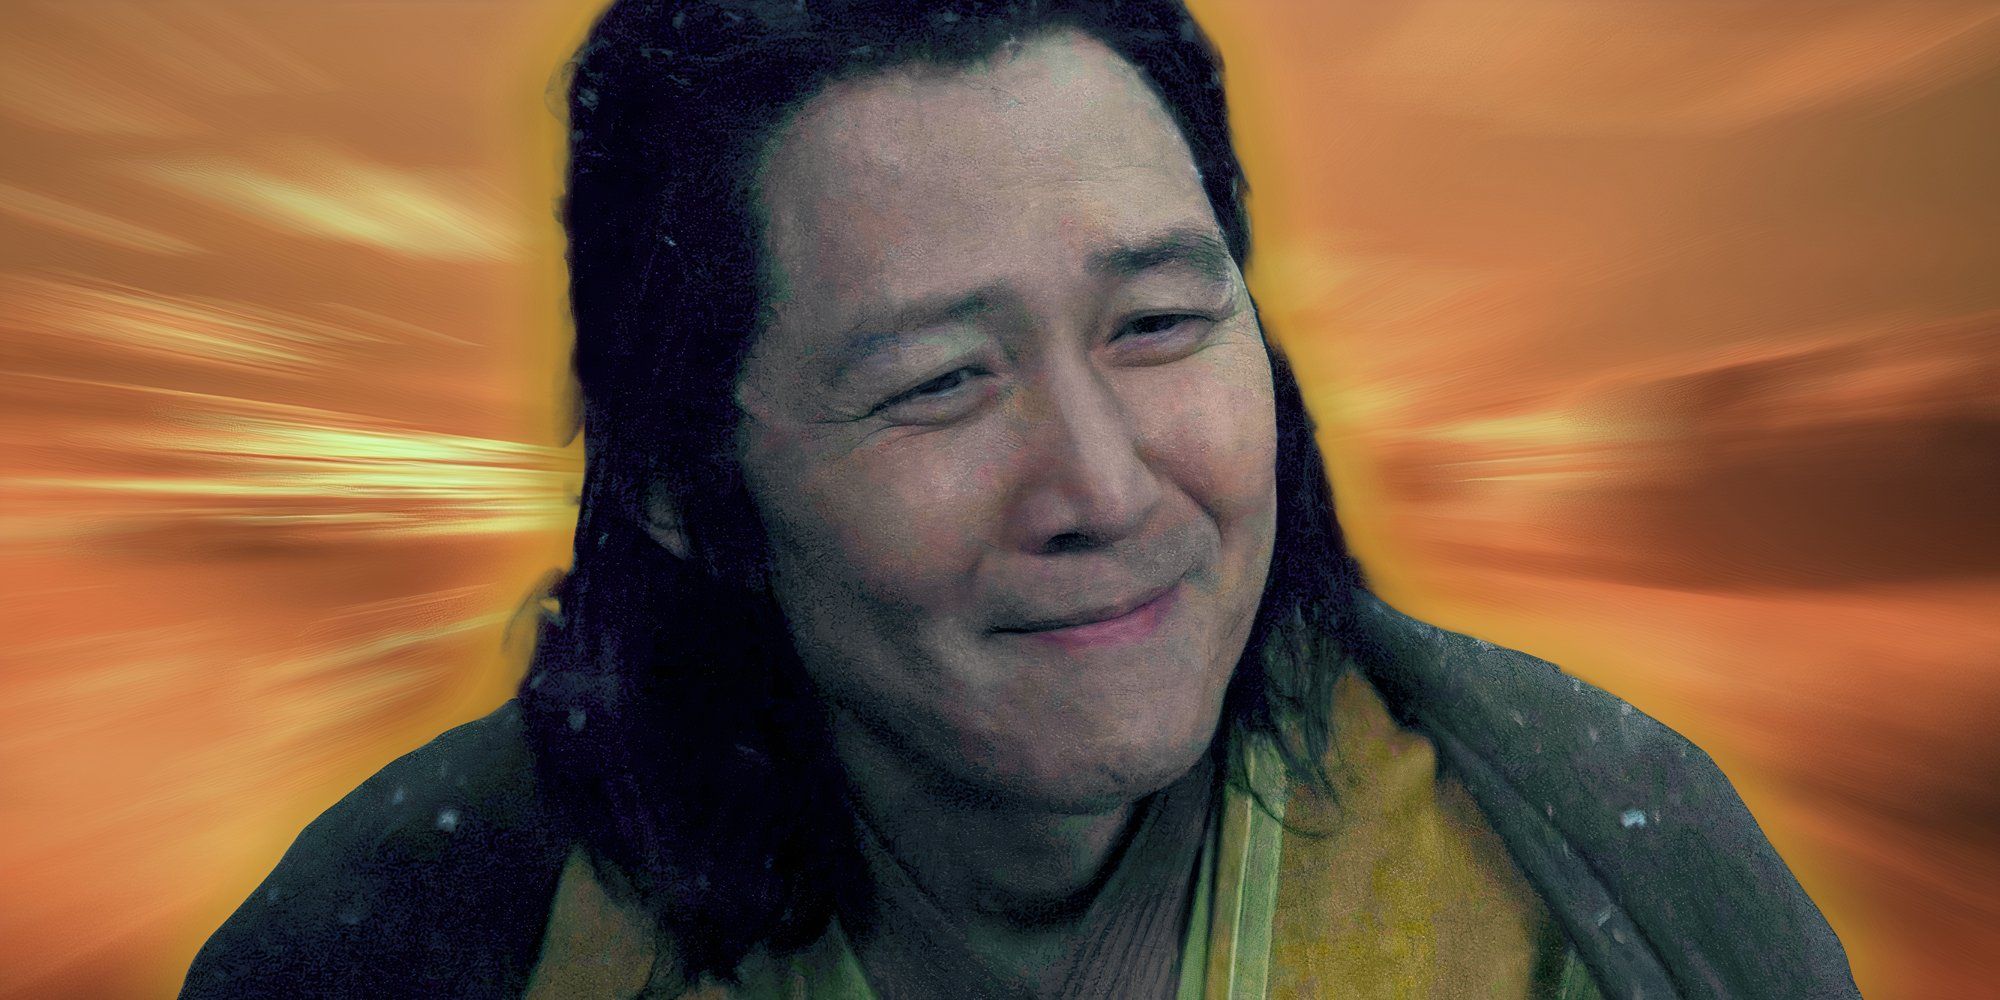 Lee Jung-jae's Master Sol smiles in The Acolyte, edited over a sunny background